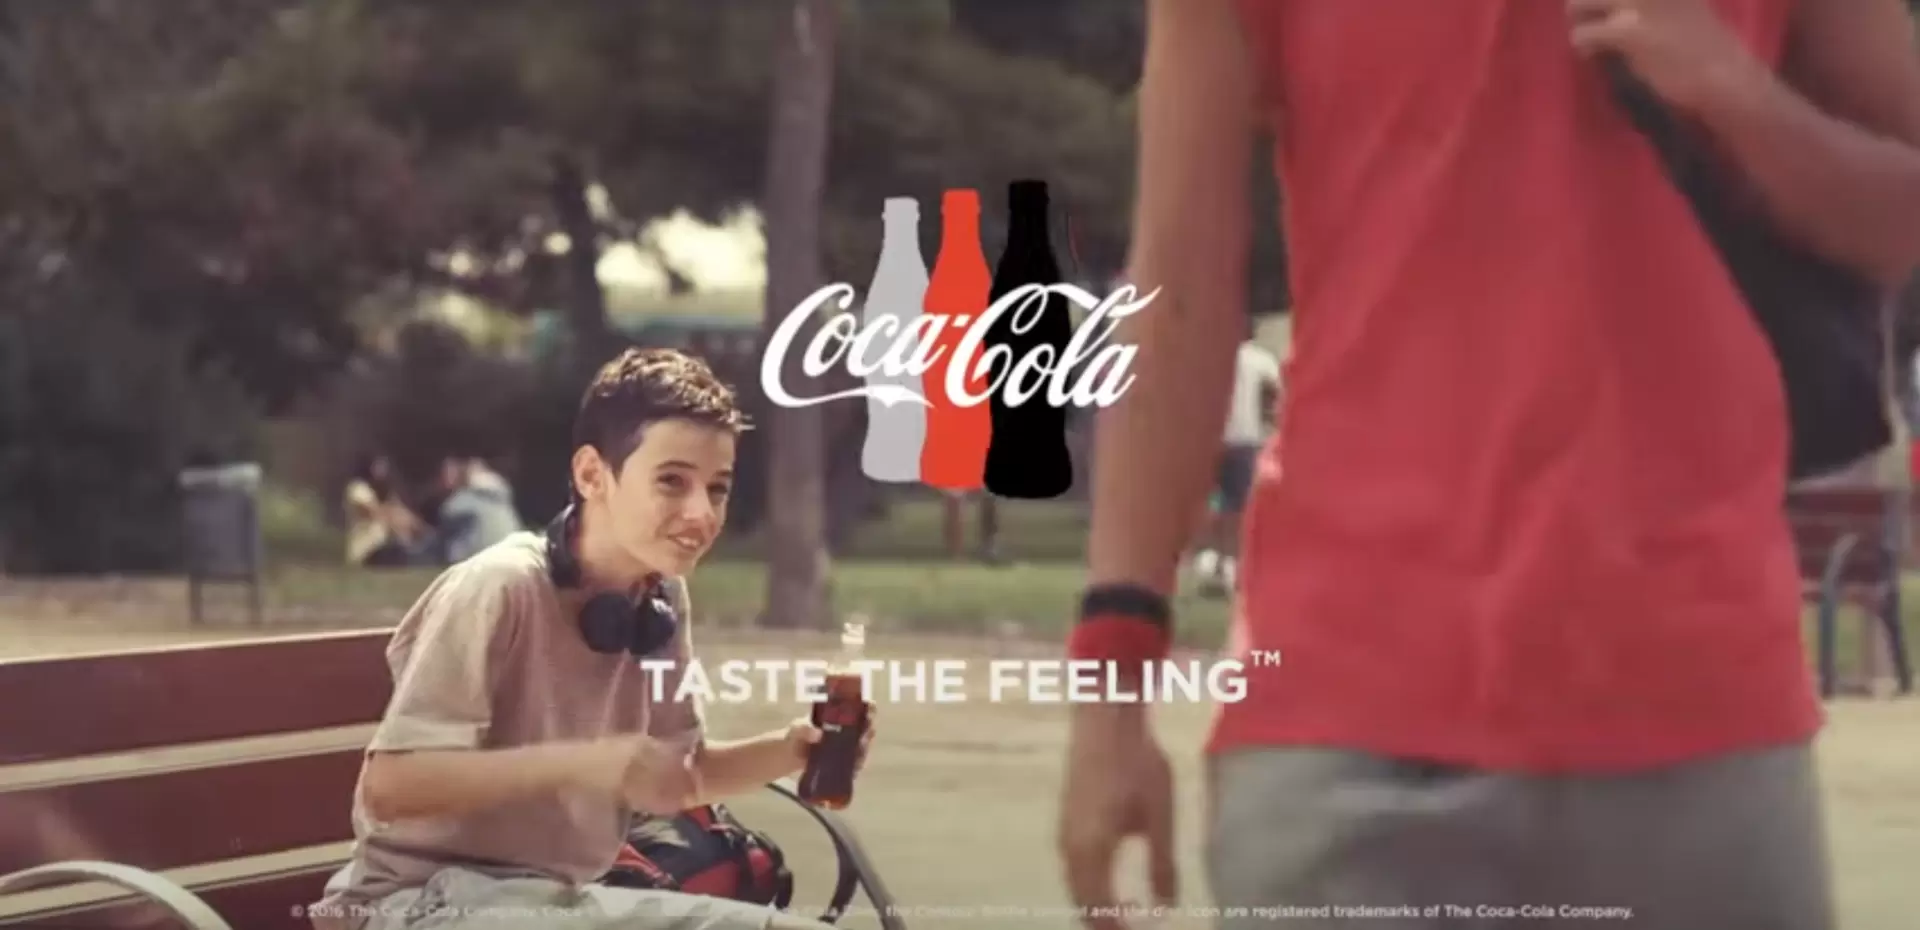 boys wearing t-shirts and drinking coca-cola